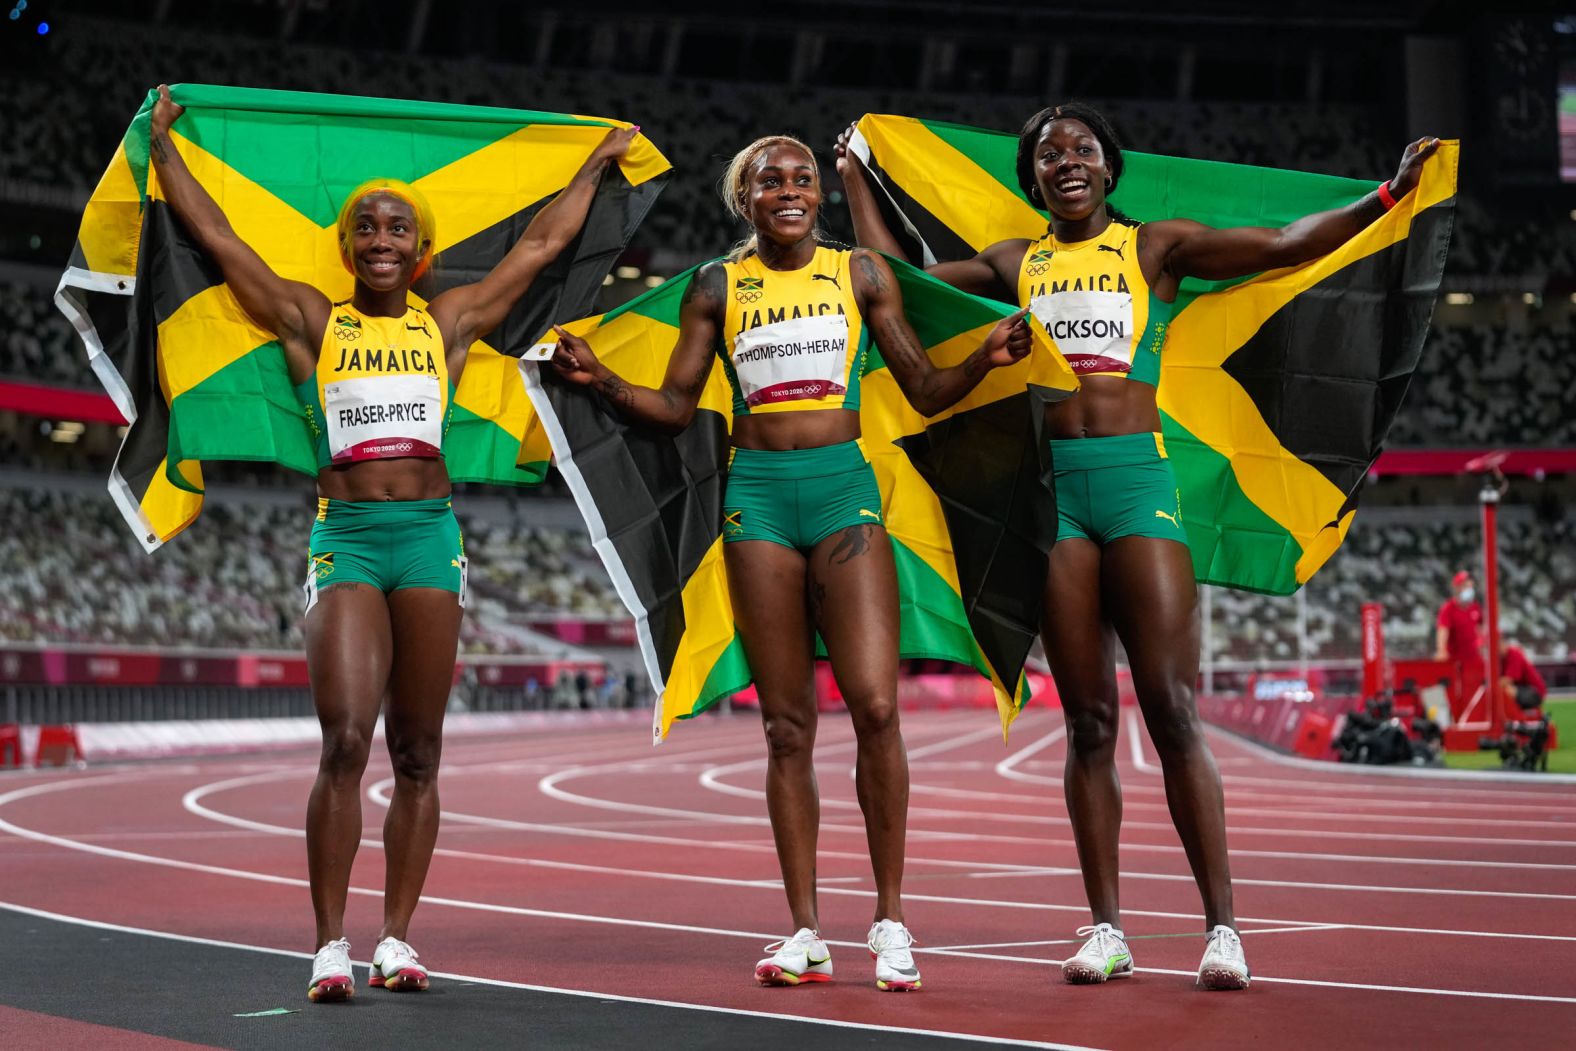 From left, Jamaican sprinters Shelly-Ann Fraser-Pryce, Elaine Thompson-Herah and Shericka Jackson celebrate after <a href="index.php?page=&url=https%3A%2F%2Fwww.cnn.com%2Fworld%2Flive-news%2Ftokyo-2020-olympics-07-31-21-spt%2Fh_fad429aba3c7d06c0e4de7fd7b3973ba" target="_blank">sweeping the 100 meters</a> on July 31. Thompson-Herah won gold and was followed by Fraser-Pryce and Jackson.